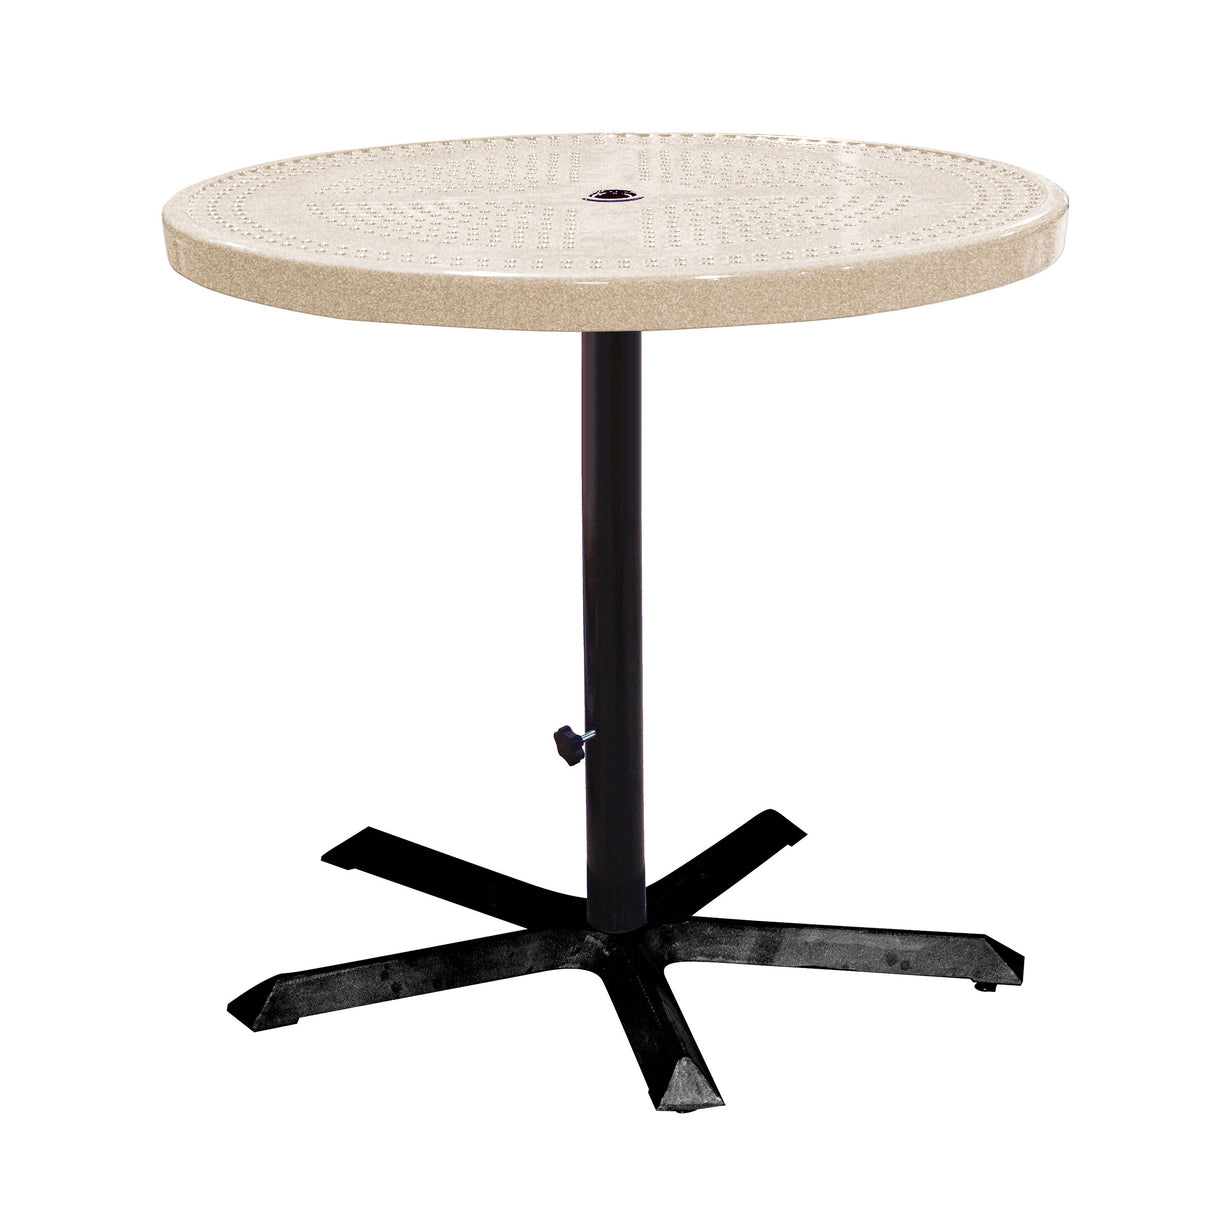 36˝ Perforated Pedestal Table